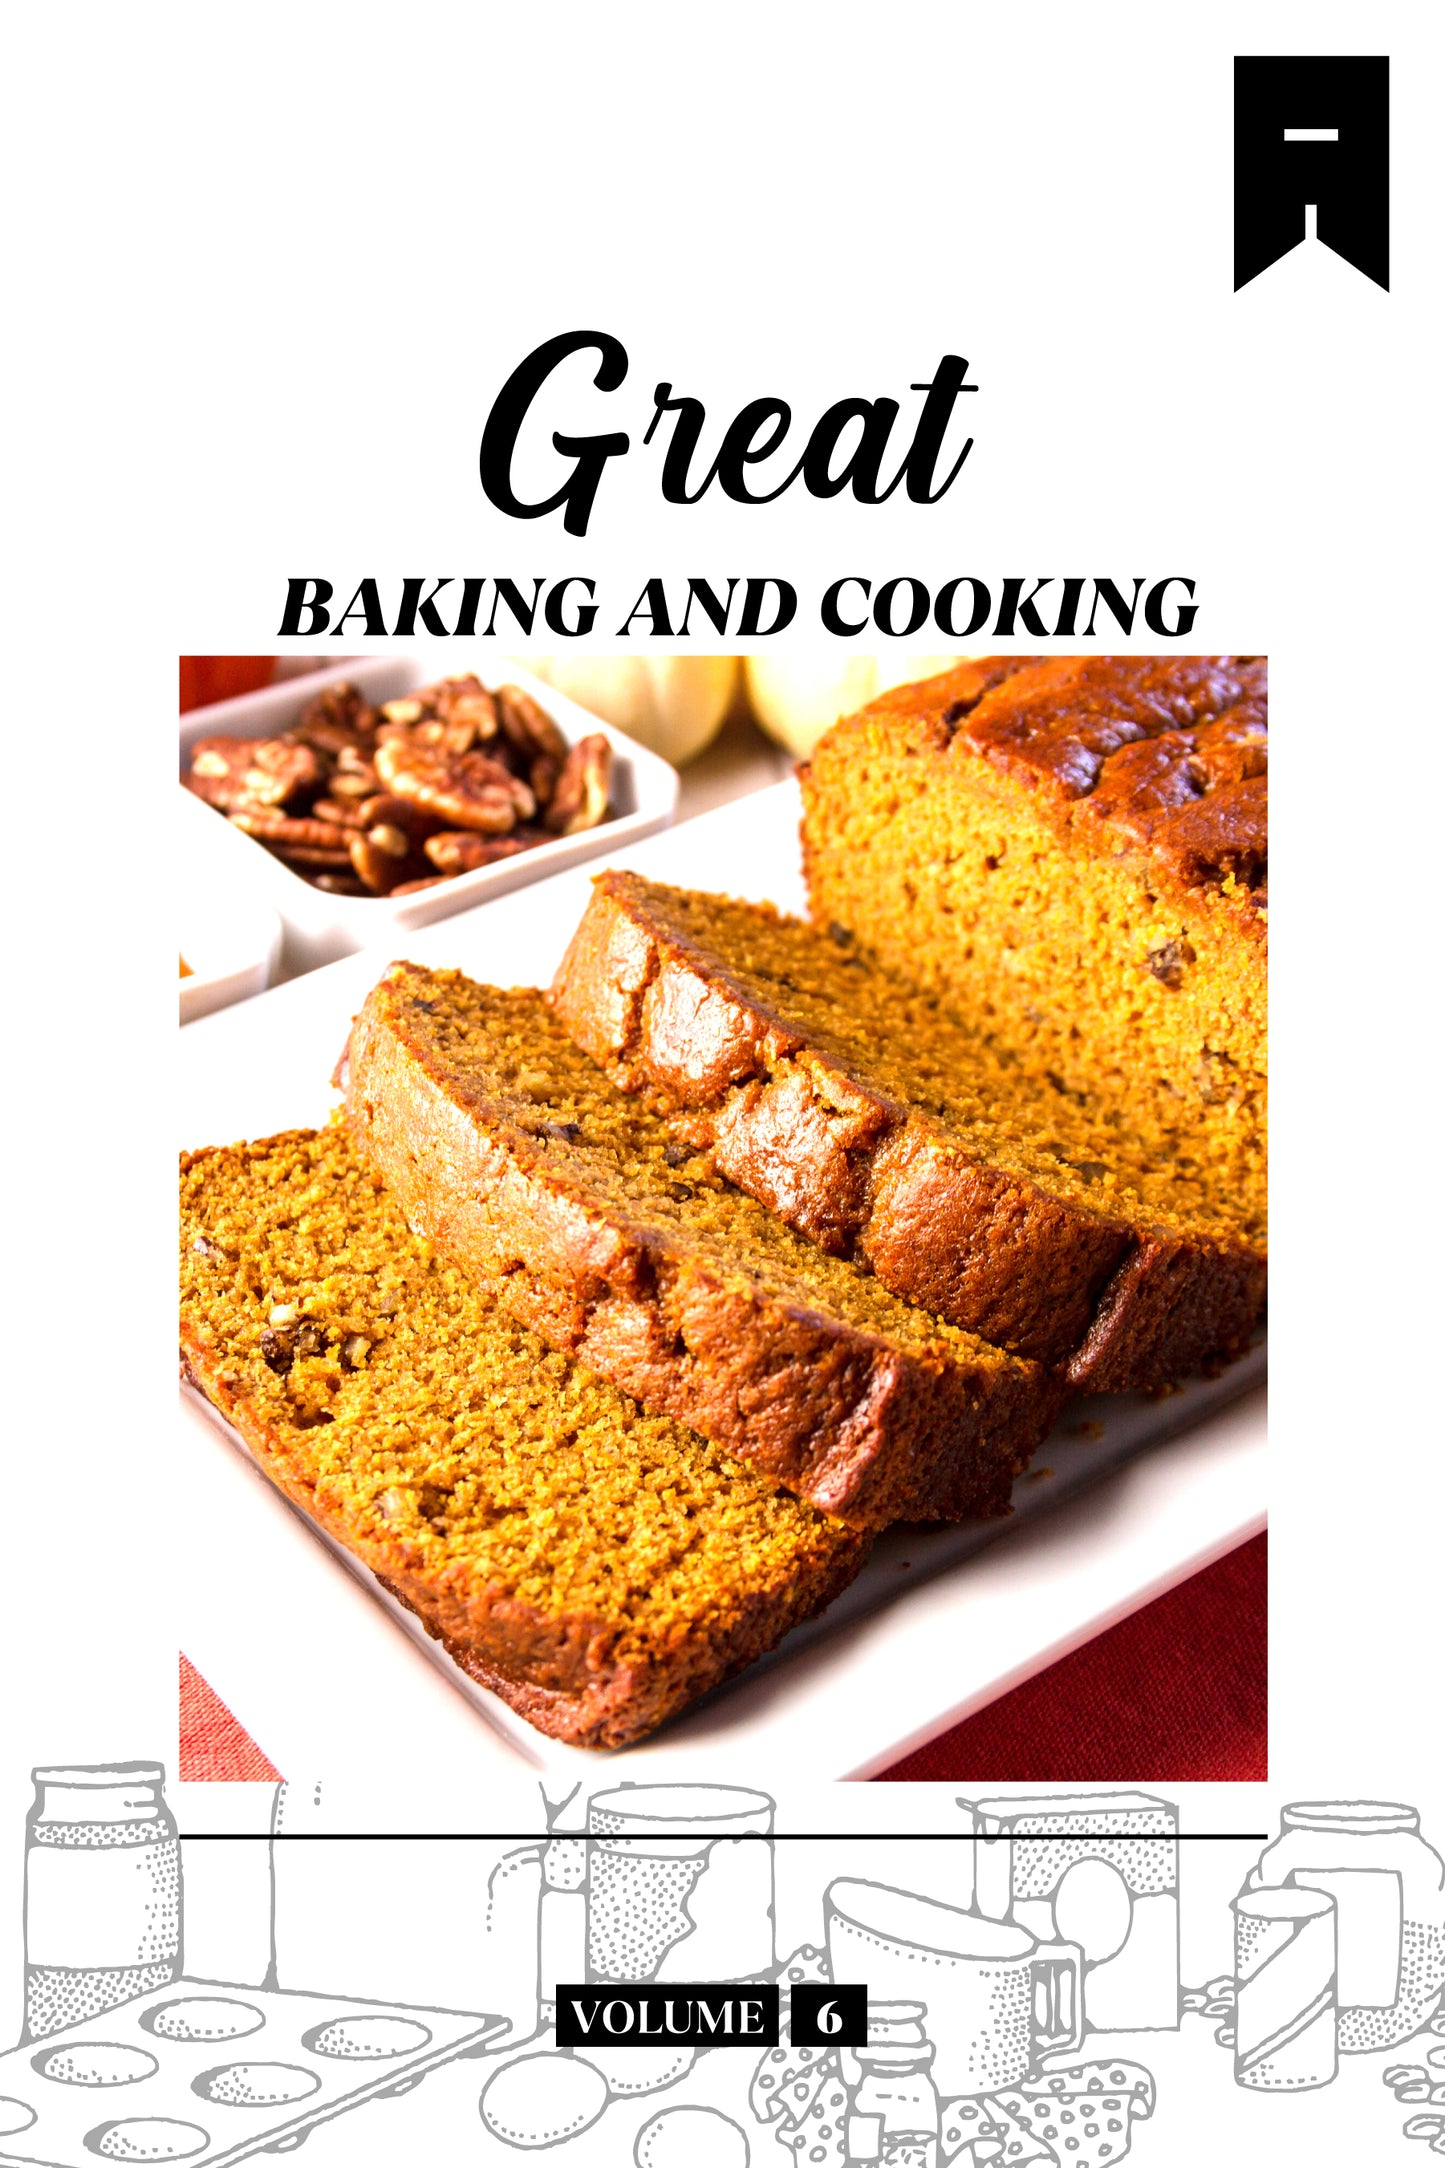 Great Baking (Volume 6) - Physical Book